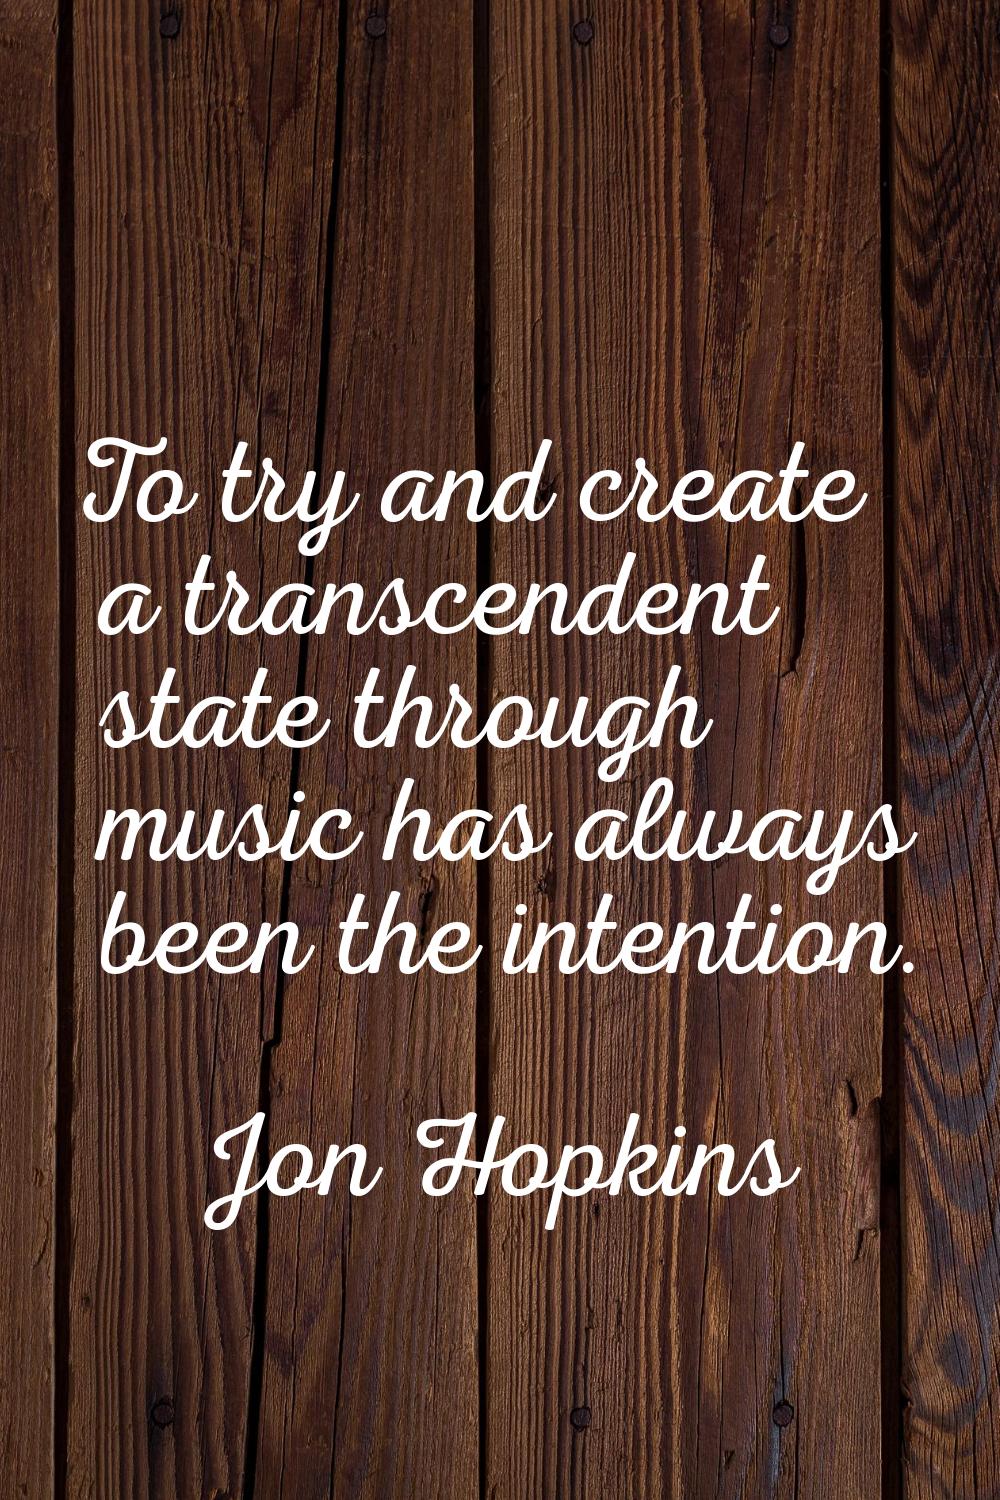 To try and create a transcendent state through music has always been the intention.